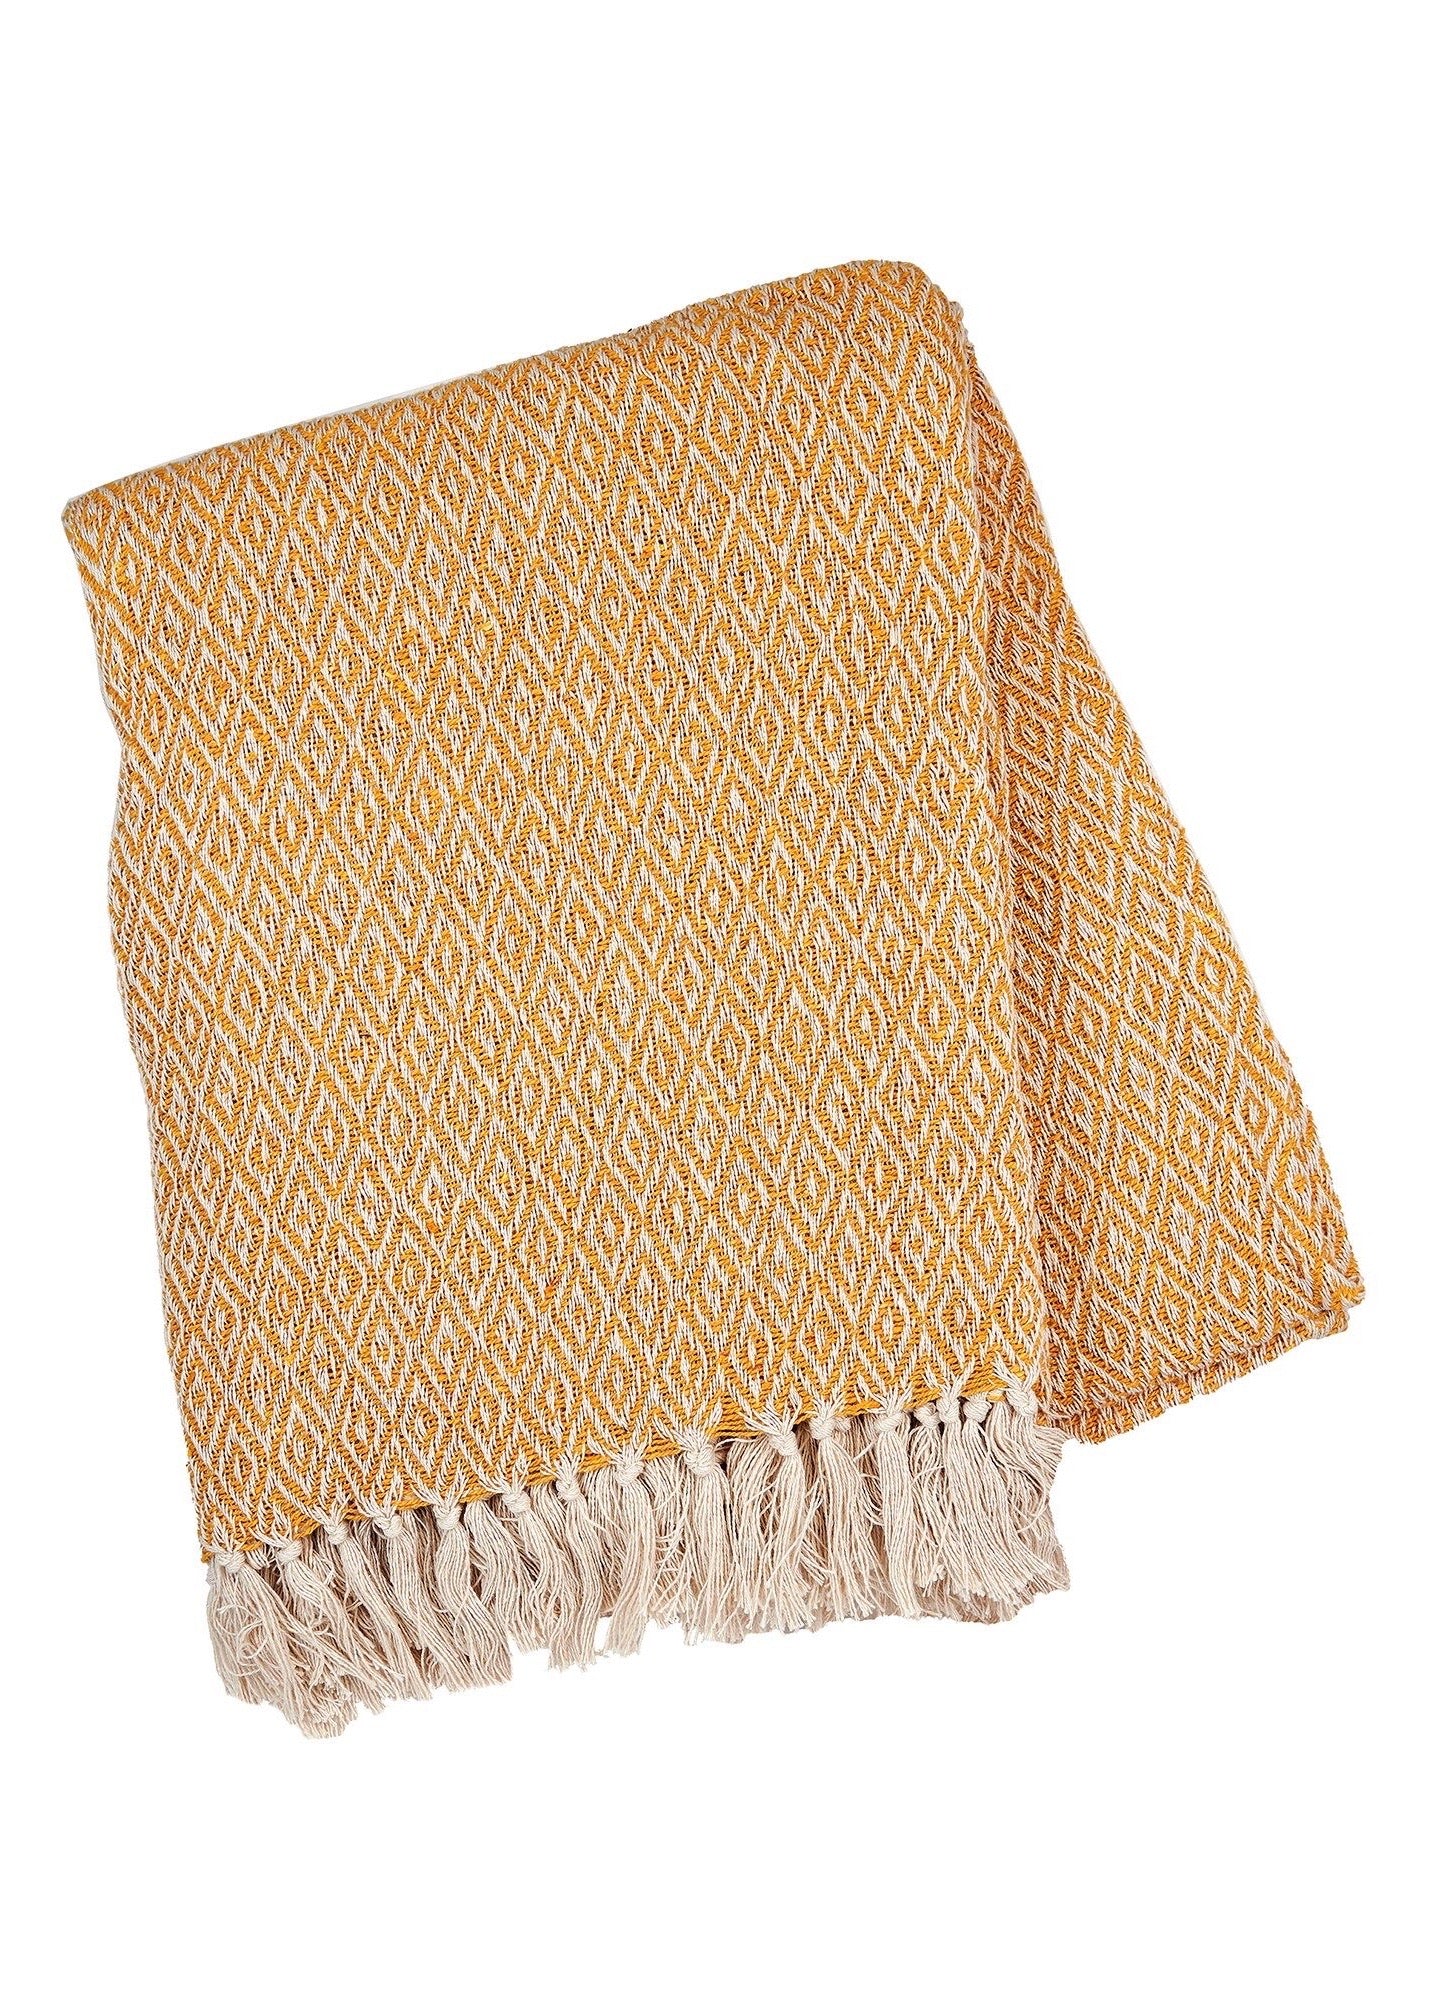 Mustard coloured throw with diamond pattern and tassles